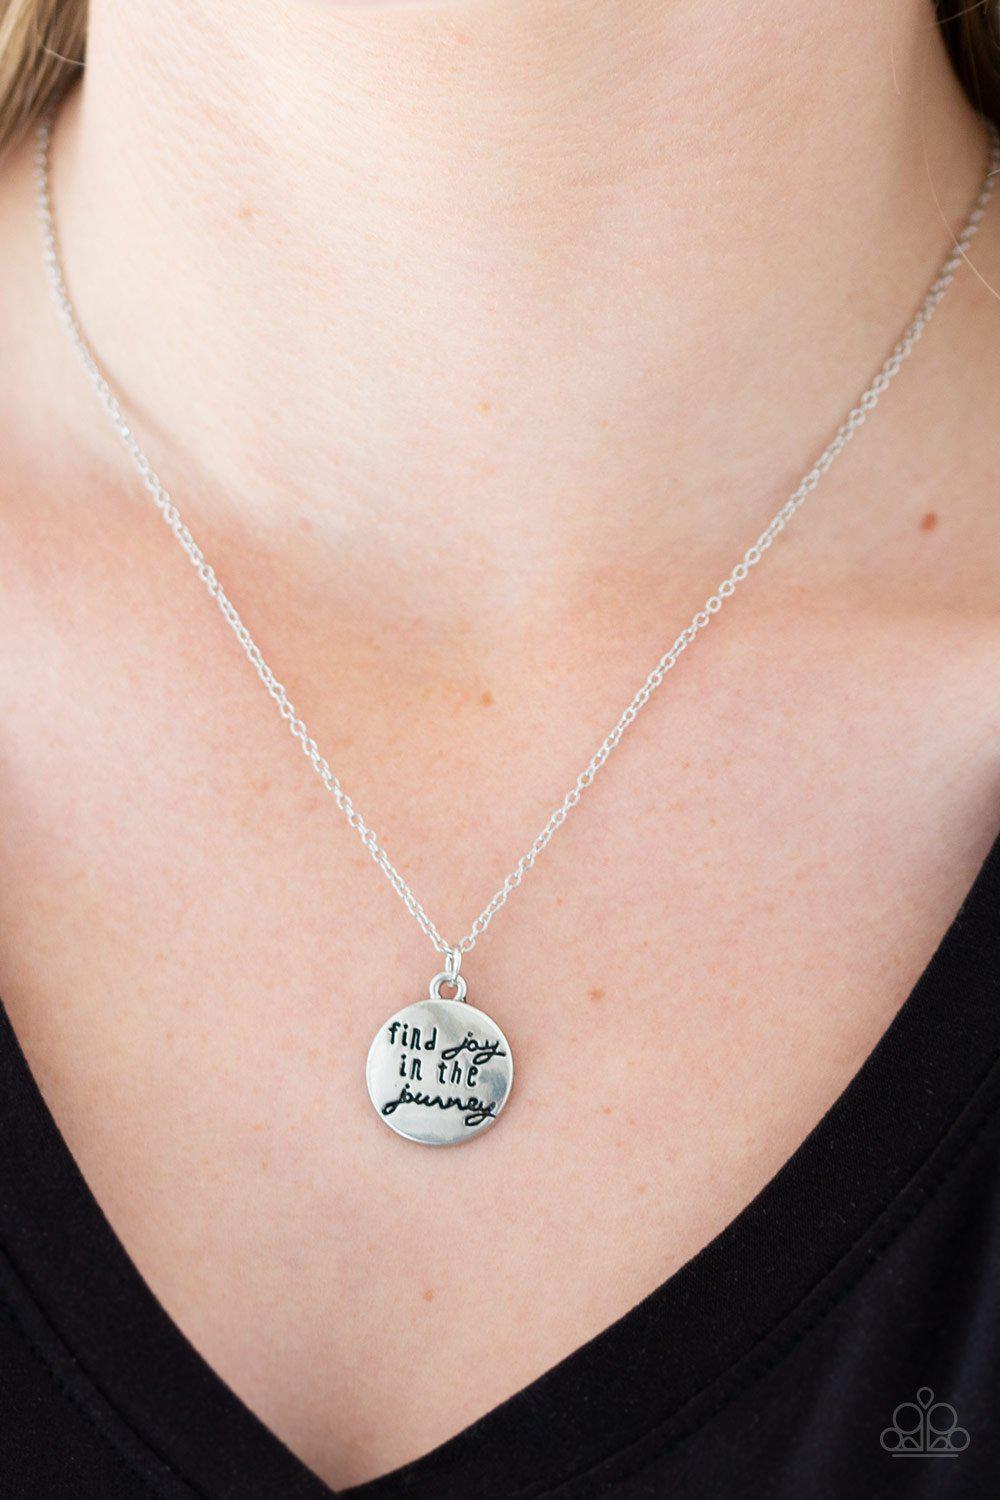 Find Joy Silver Inspirational Necklace - Paparazzi Accessories - lightbox -CarasShop.com - $5 Jewelry by Cara Jewels